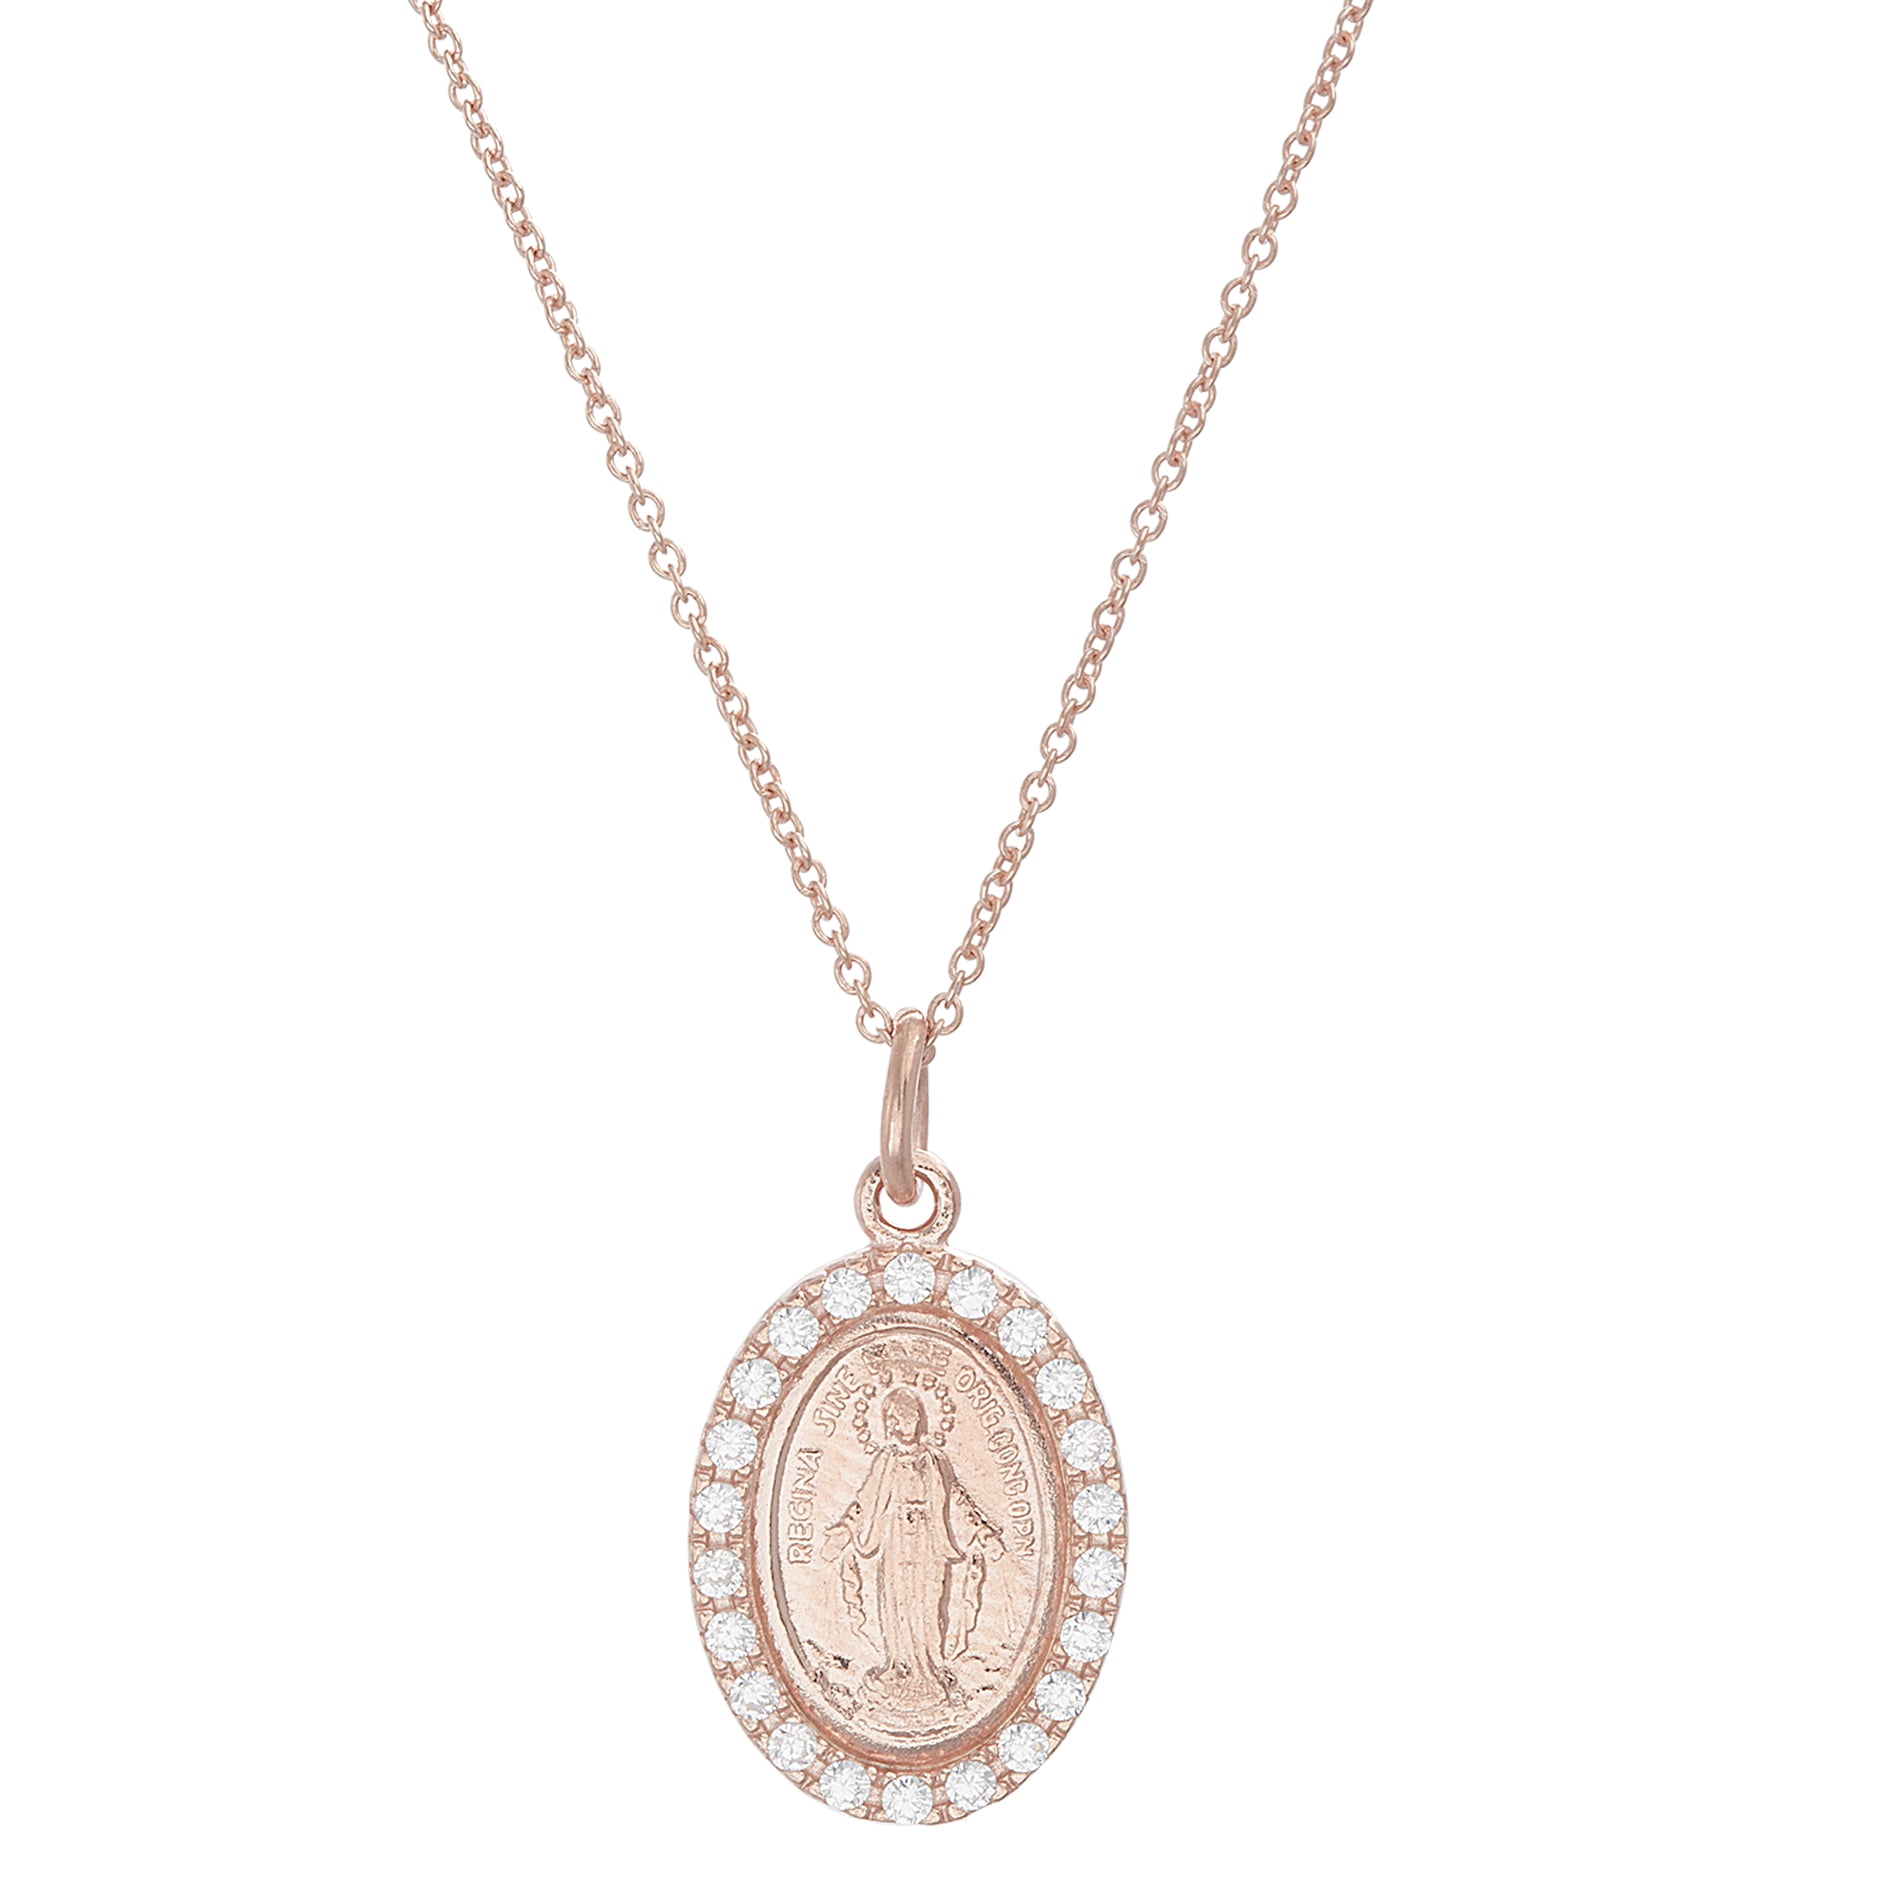 18-Inch Hamilton Gold Plated Necklace with 6mm Faux-Pearl Beads and Sorrowful Mother Charm. 